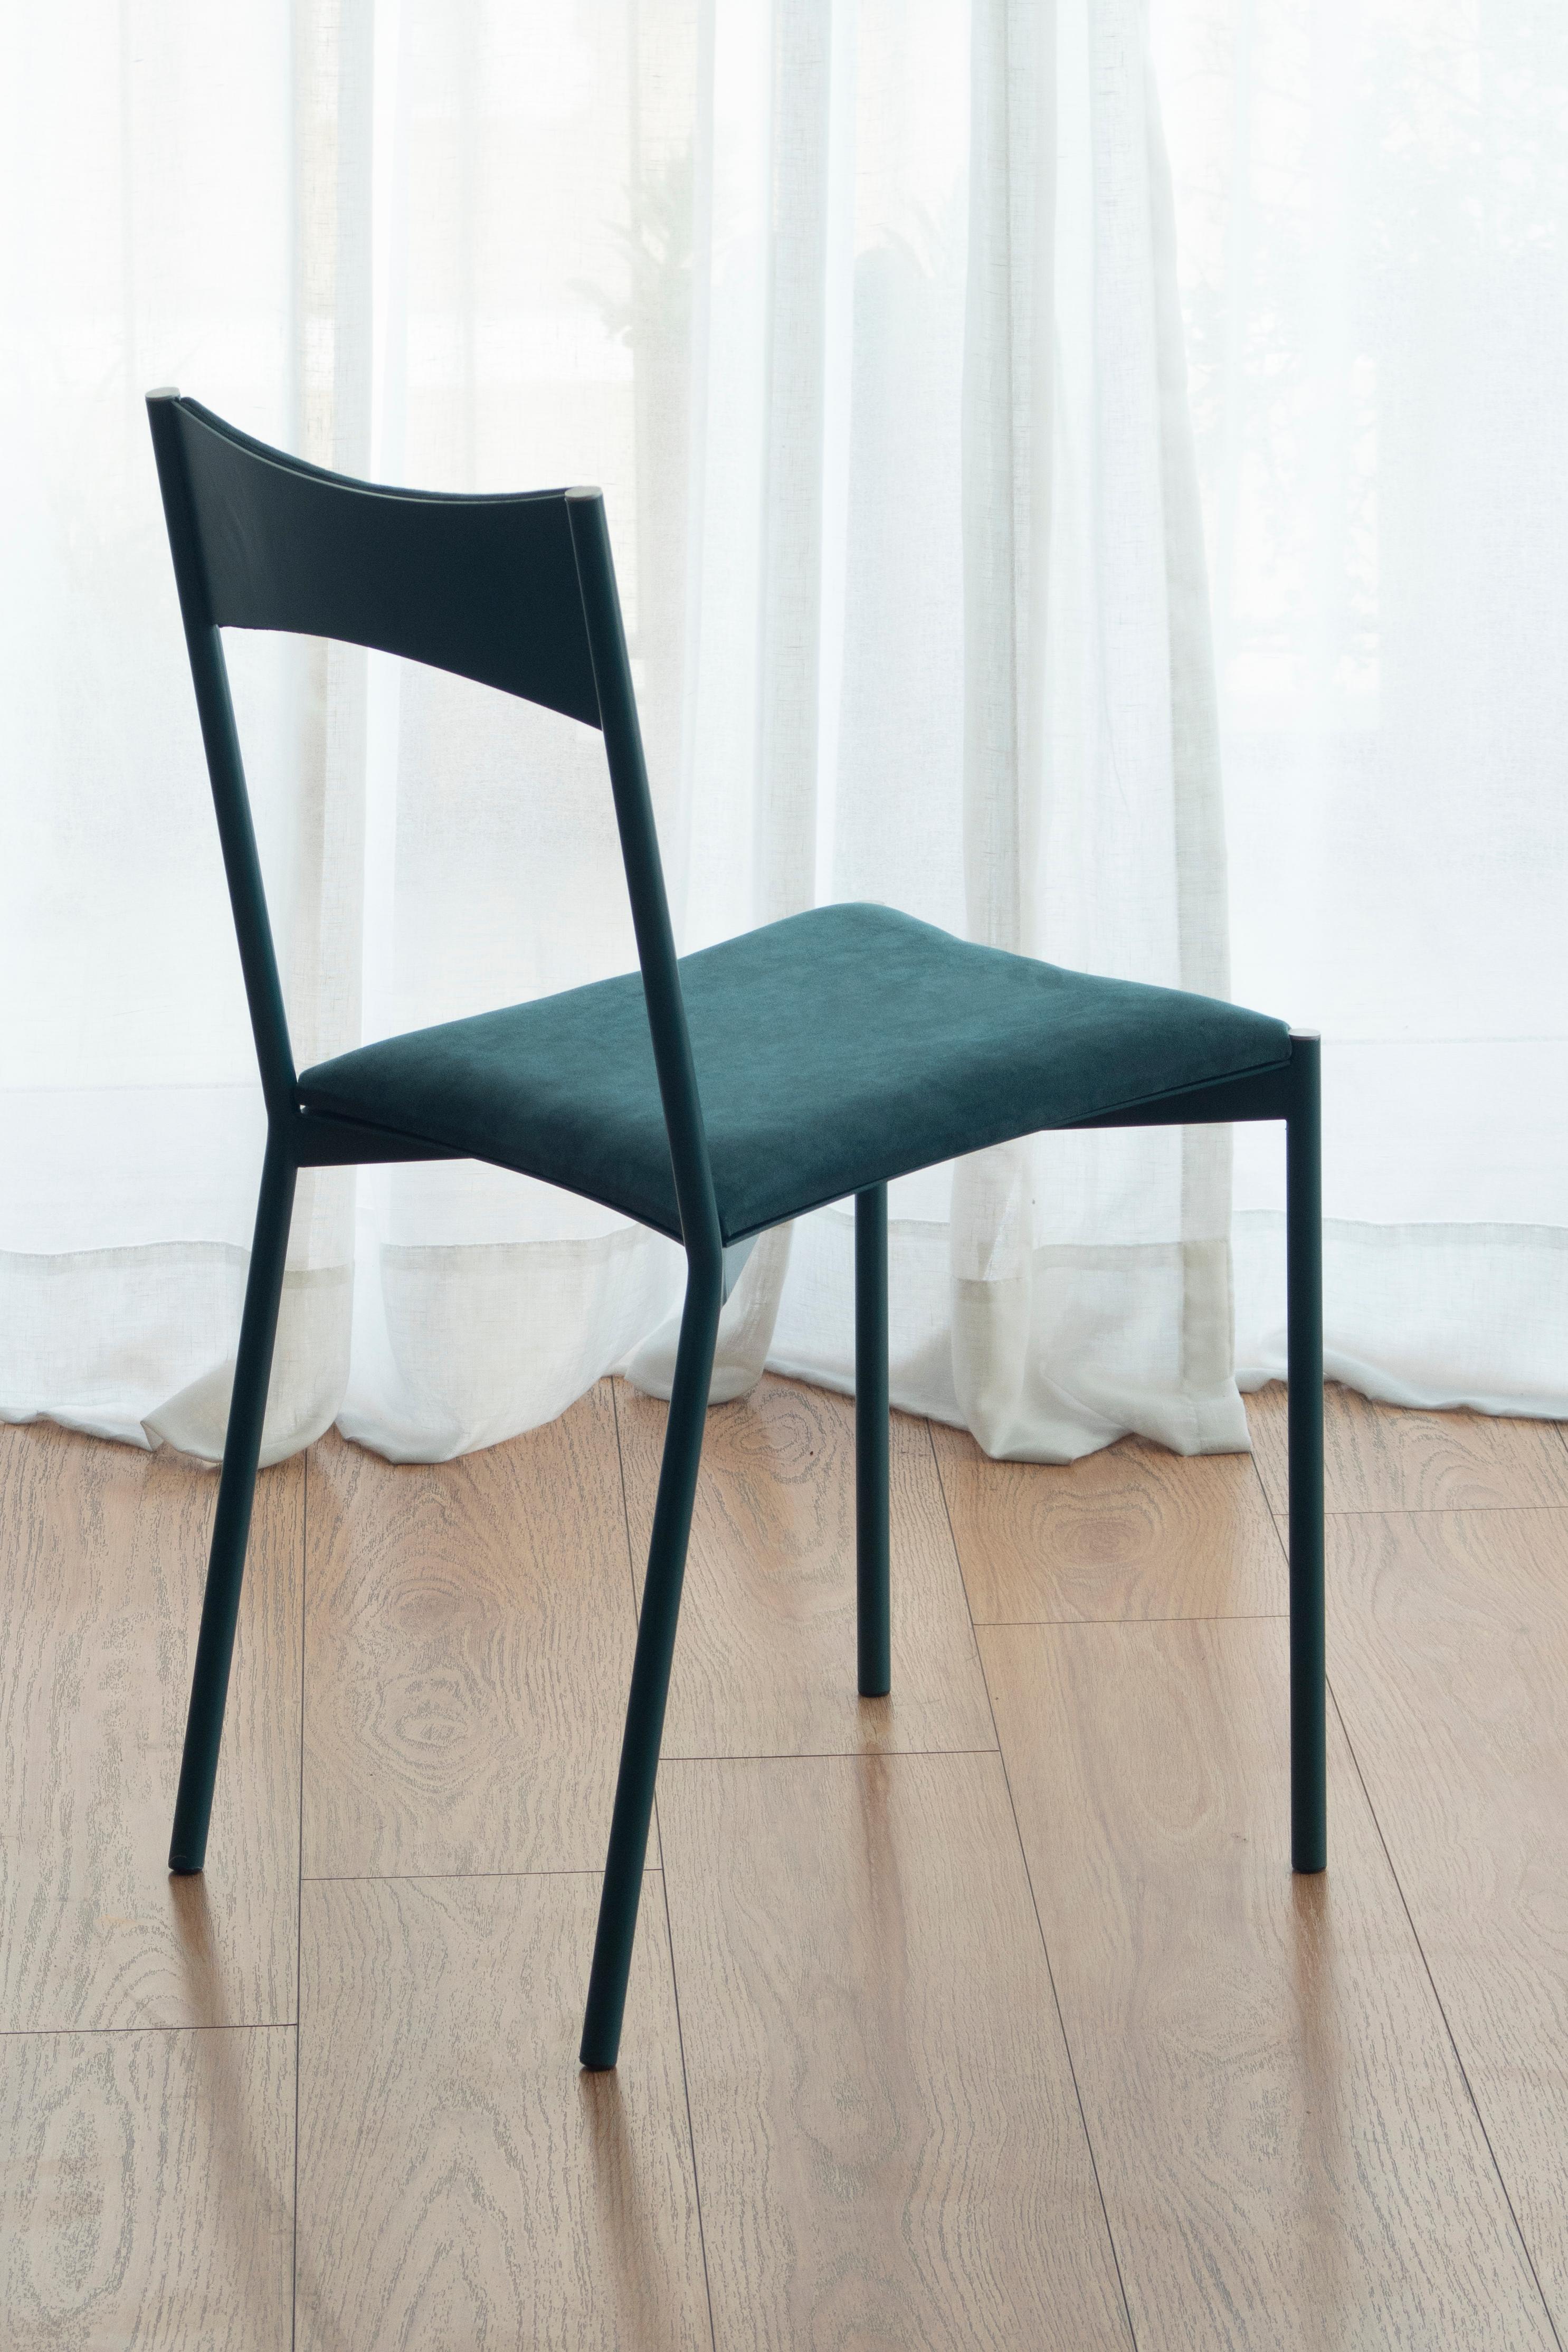 Tensa chair, oceano by Ries
Dimensions: W40 x D49,5 x H82 cm 
Materials: Round steel tube, laser cut metal sheet, high density foam, velvet upholstery, aluminum/bronze caps
Matte powder coated painting (Finishings)

Also available: Dark blue,